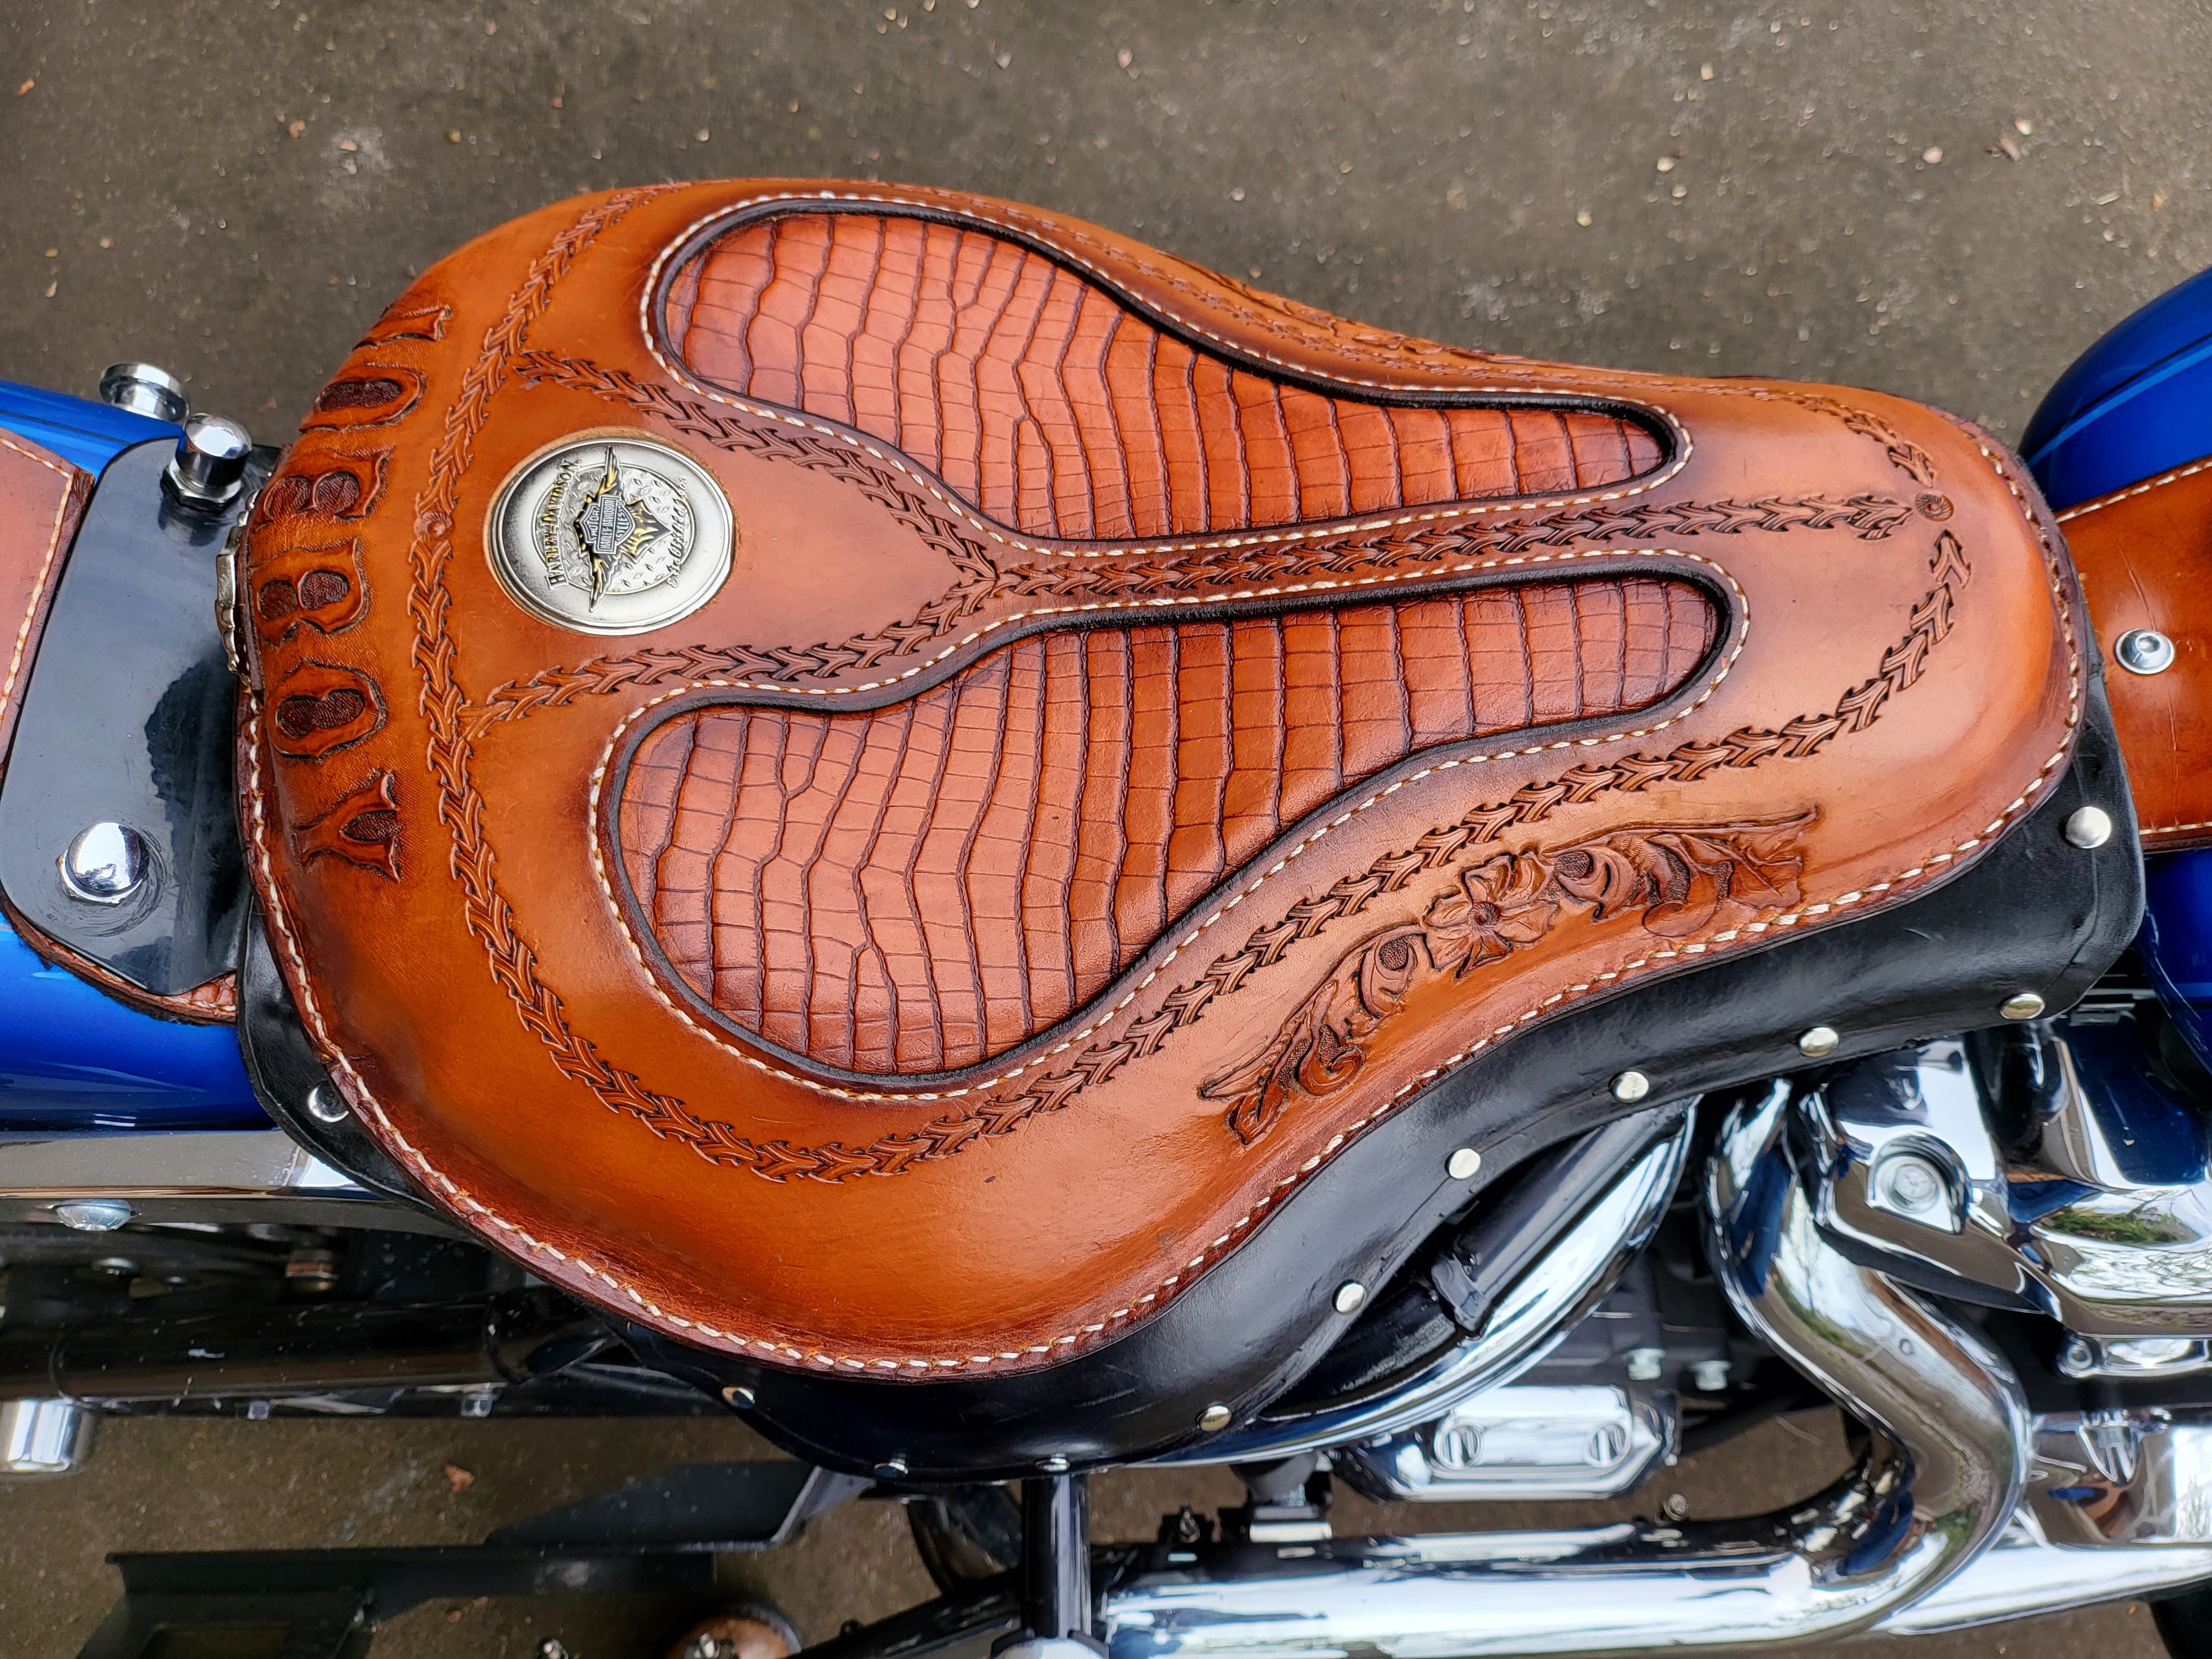 An awesome motorbike seat by Joeboy